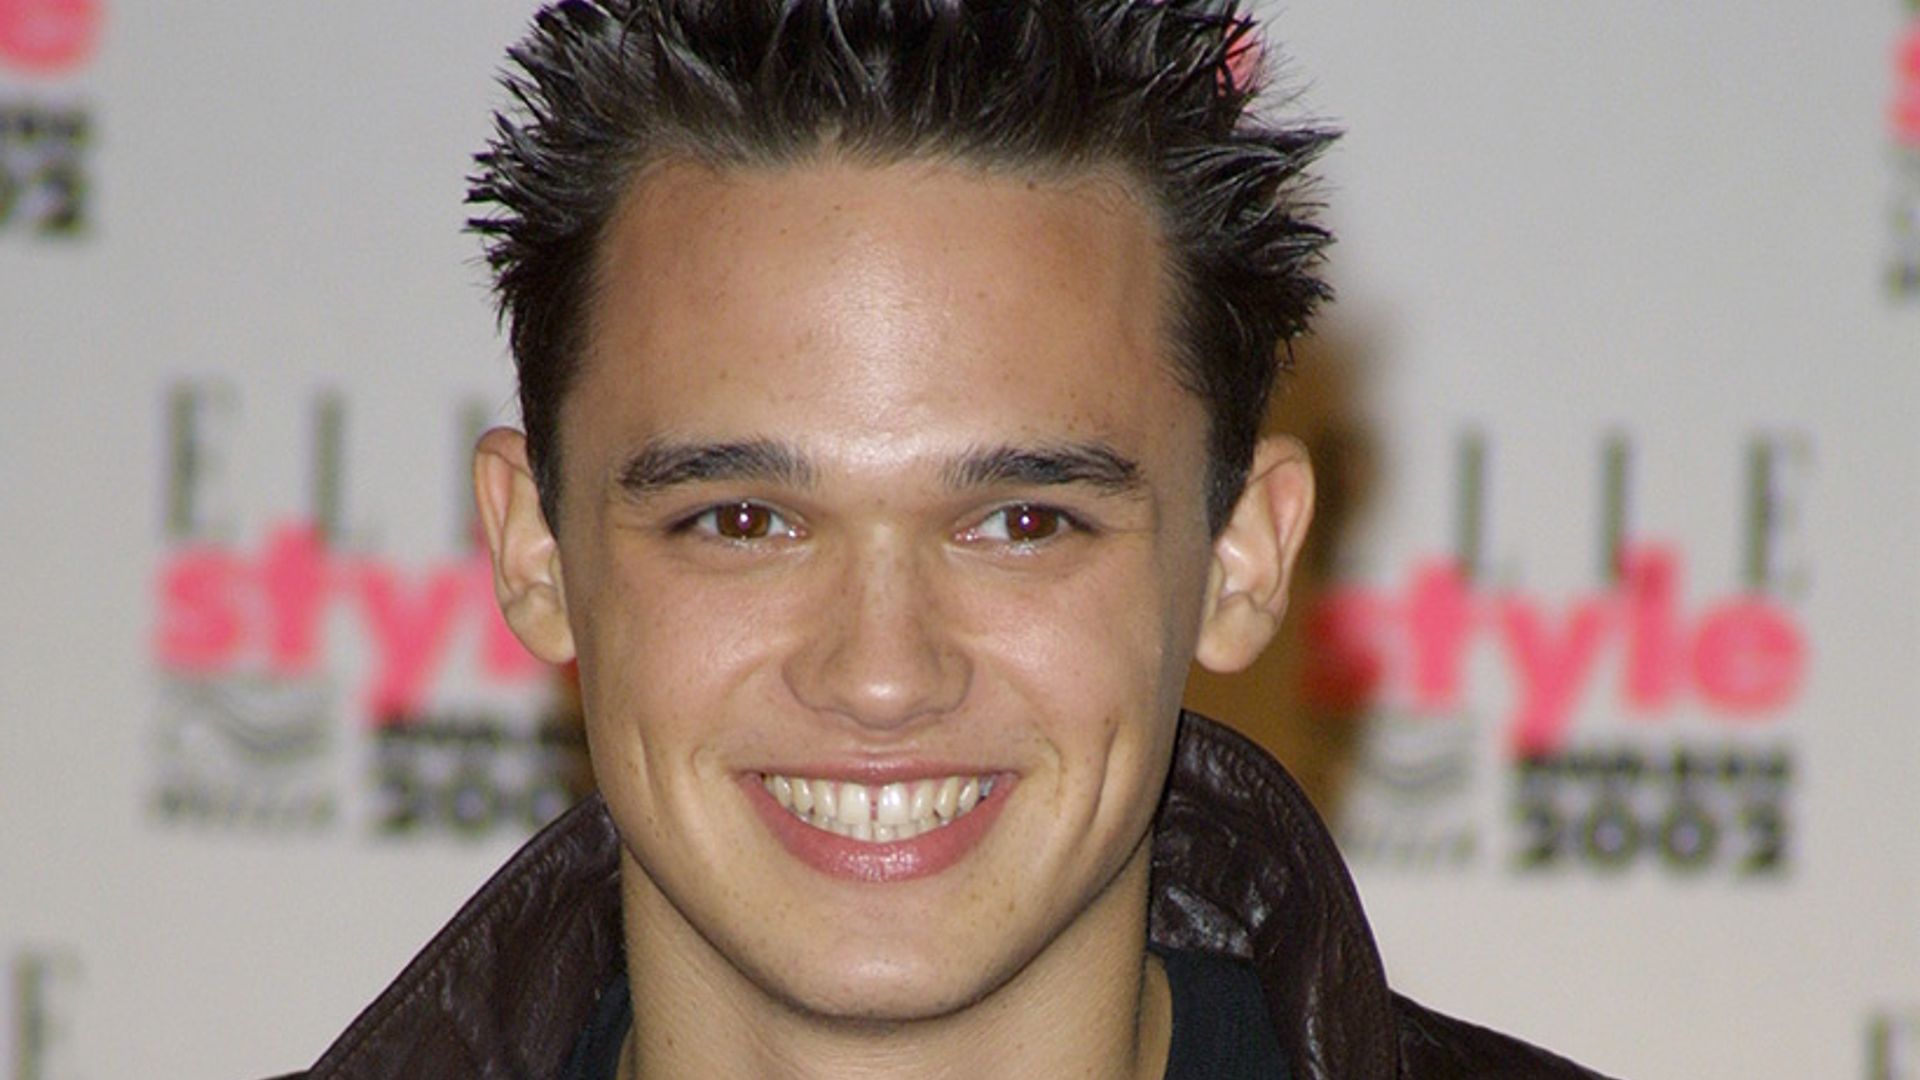 Gareth Gates doesn't look like this anymore!